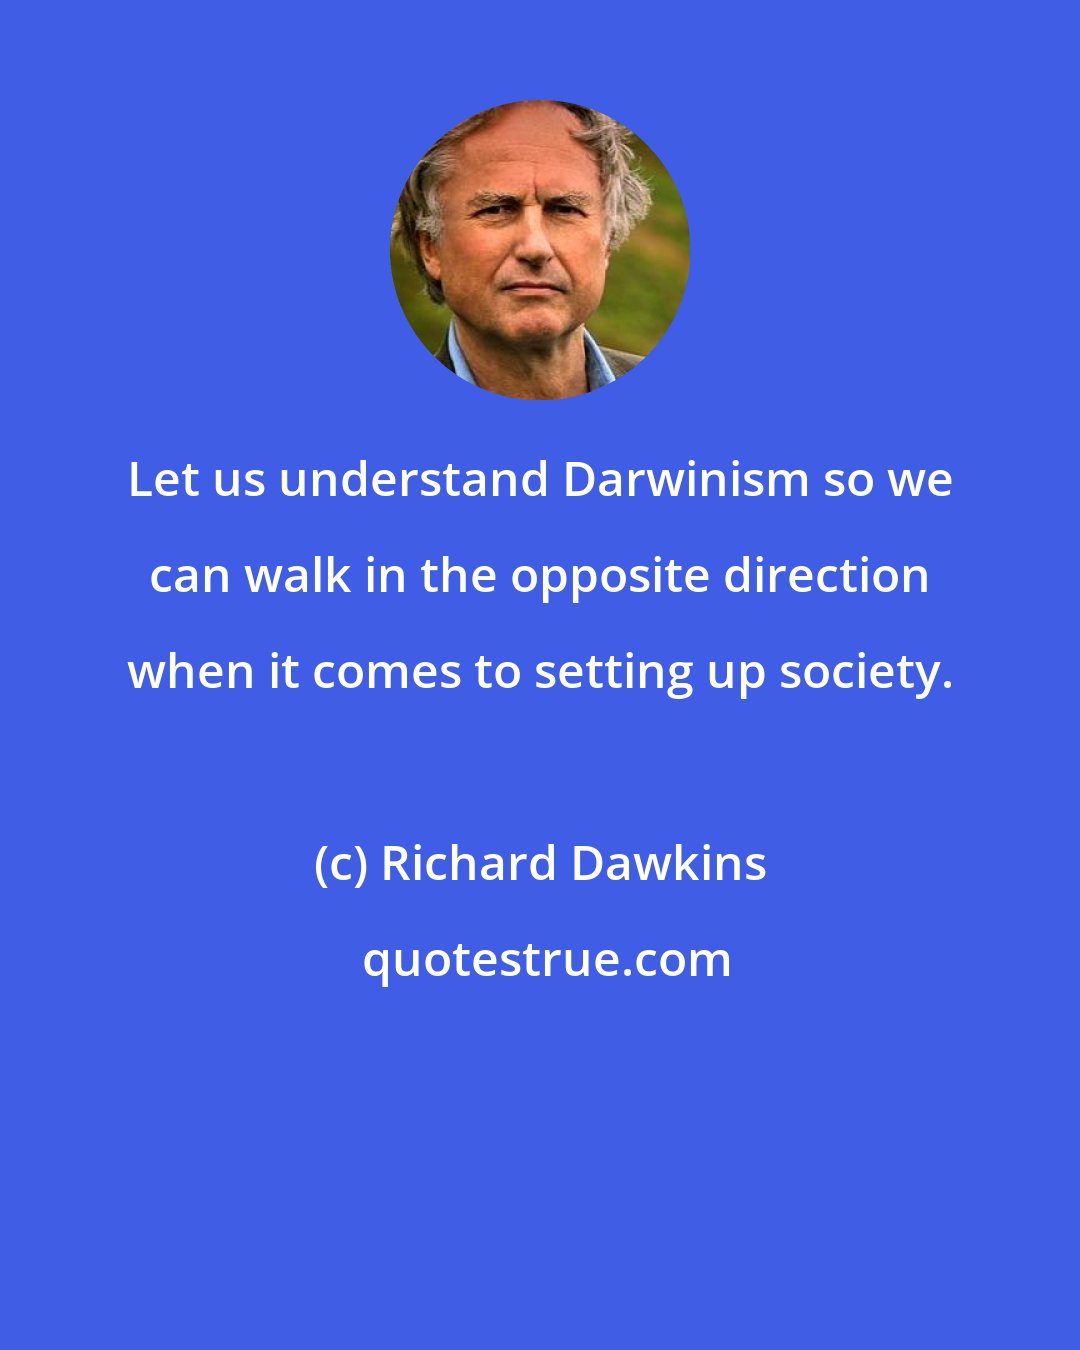 Richard Dawkins: Let us understand Darwinism so we can walk in the opposite direction when it comes to setting up society.